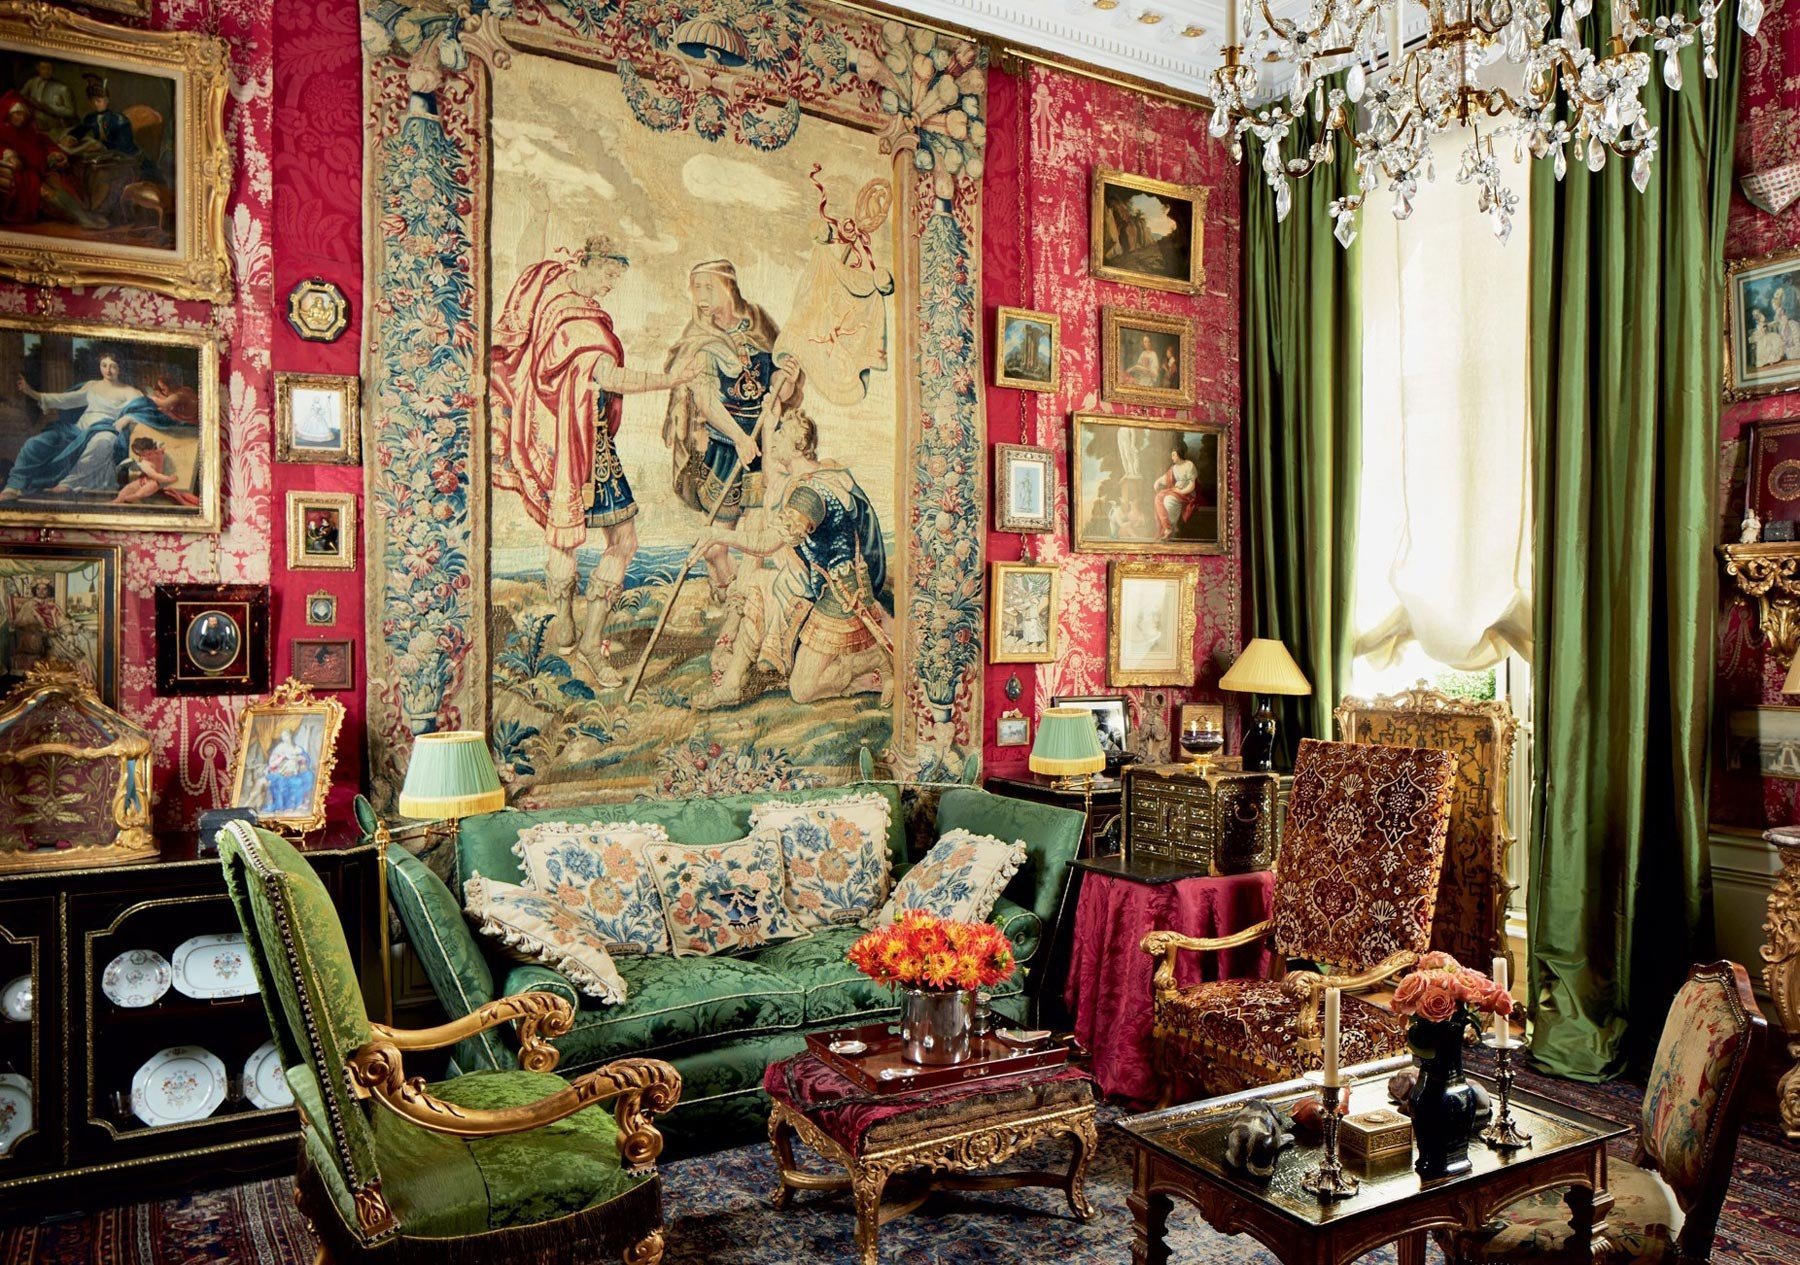 room with expensive items: luxury armchairs, expensive carpets, old paintings